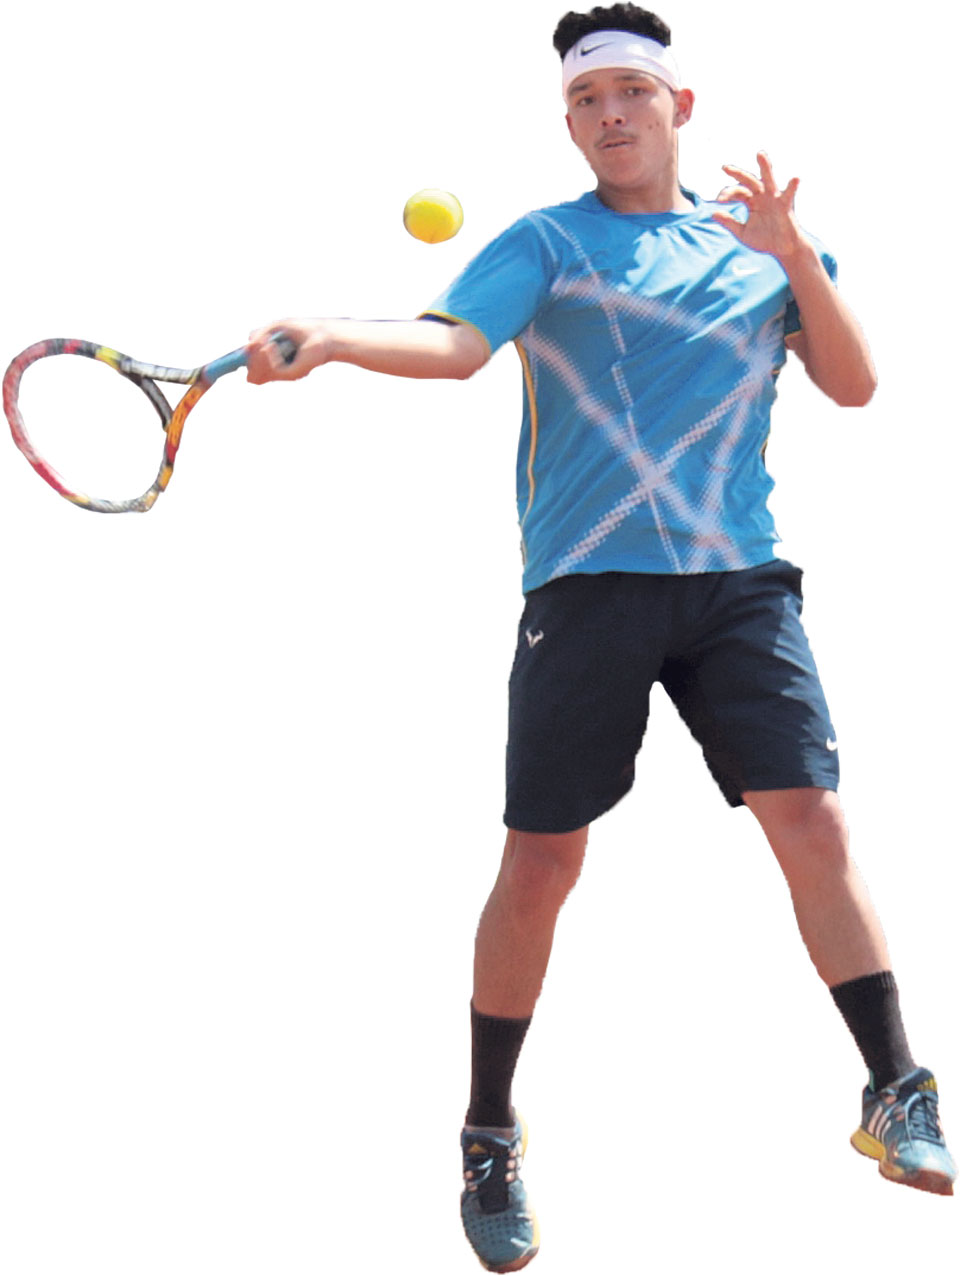 Taking Nepali tennis to greater height